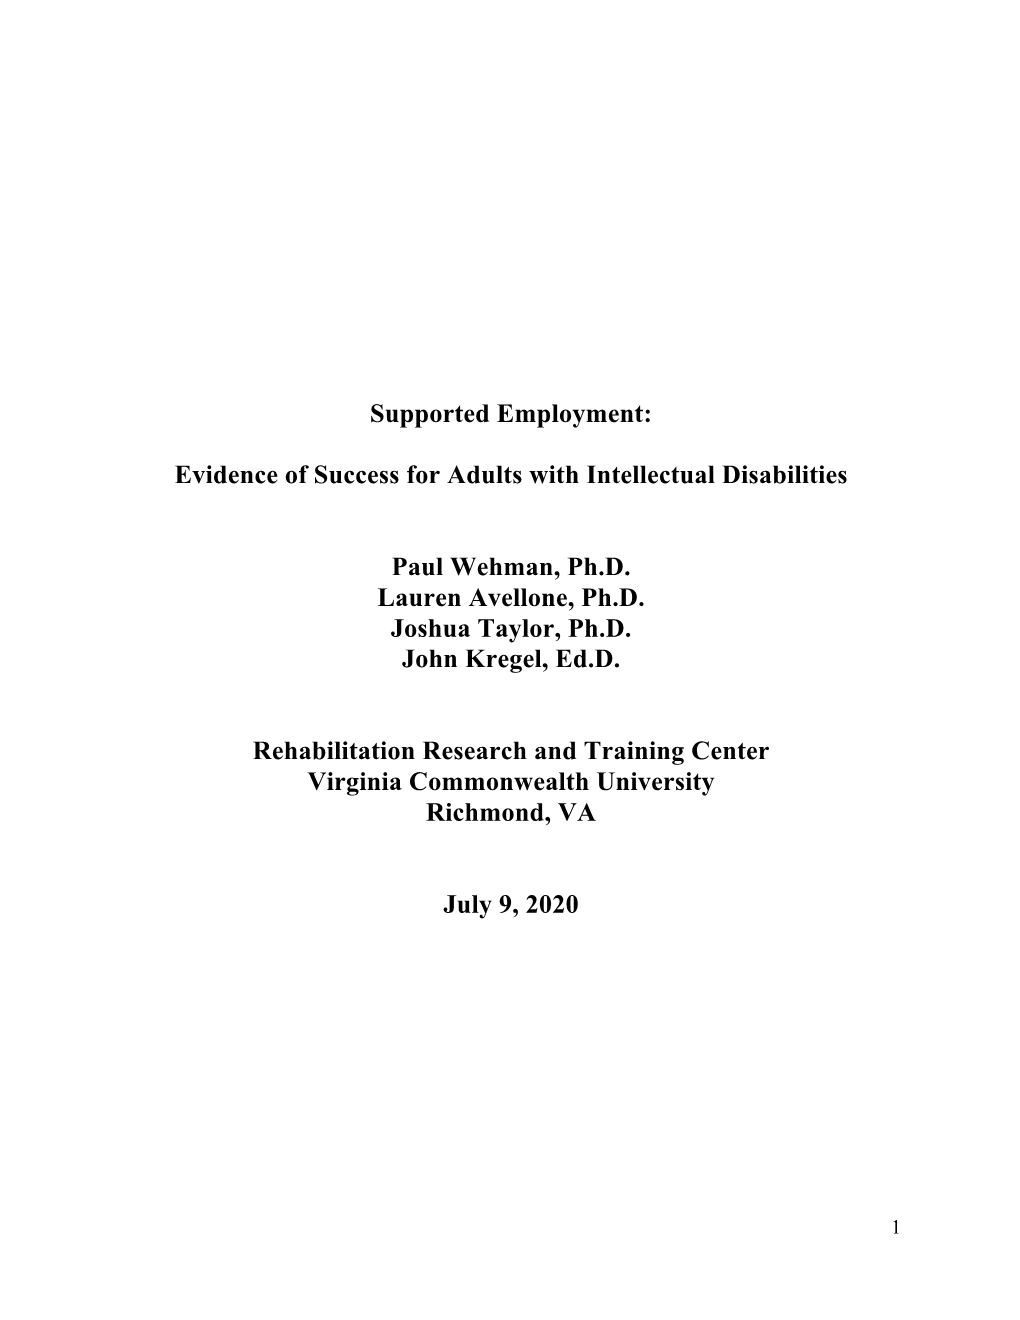 Supported Employment: Evidence of Success for Adults with Intellectual Disabilities